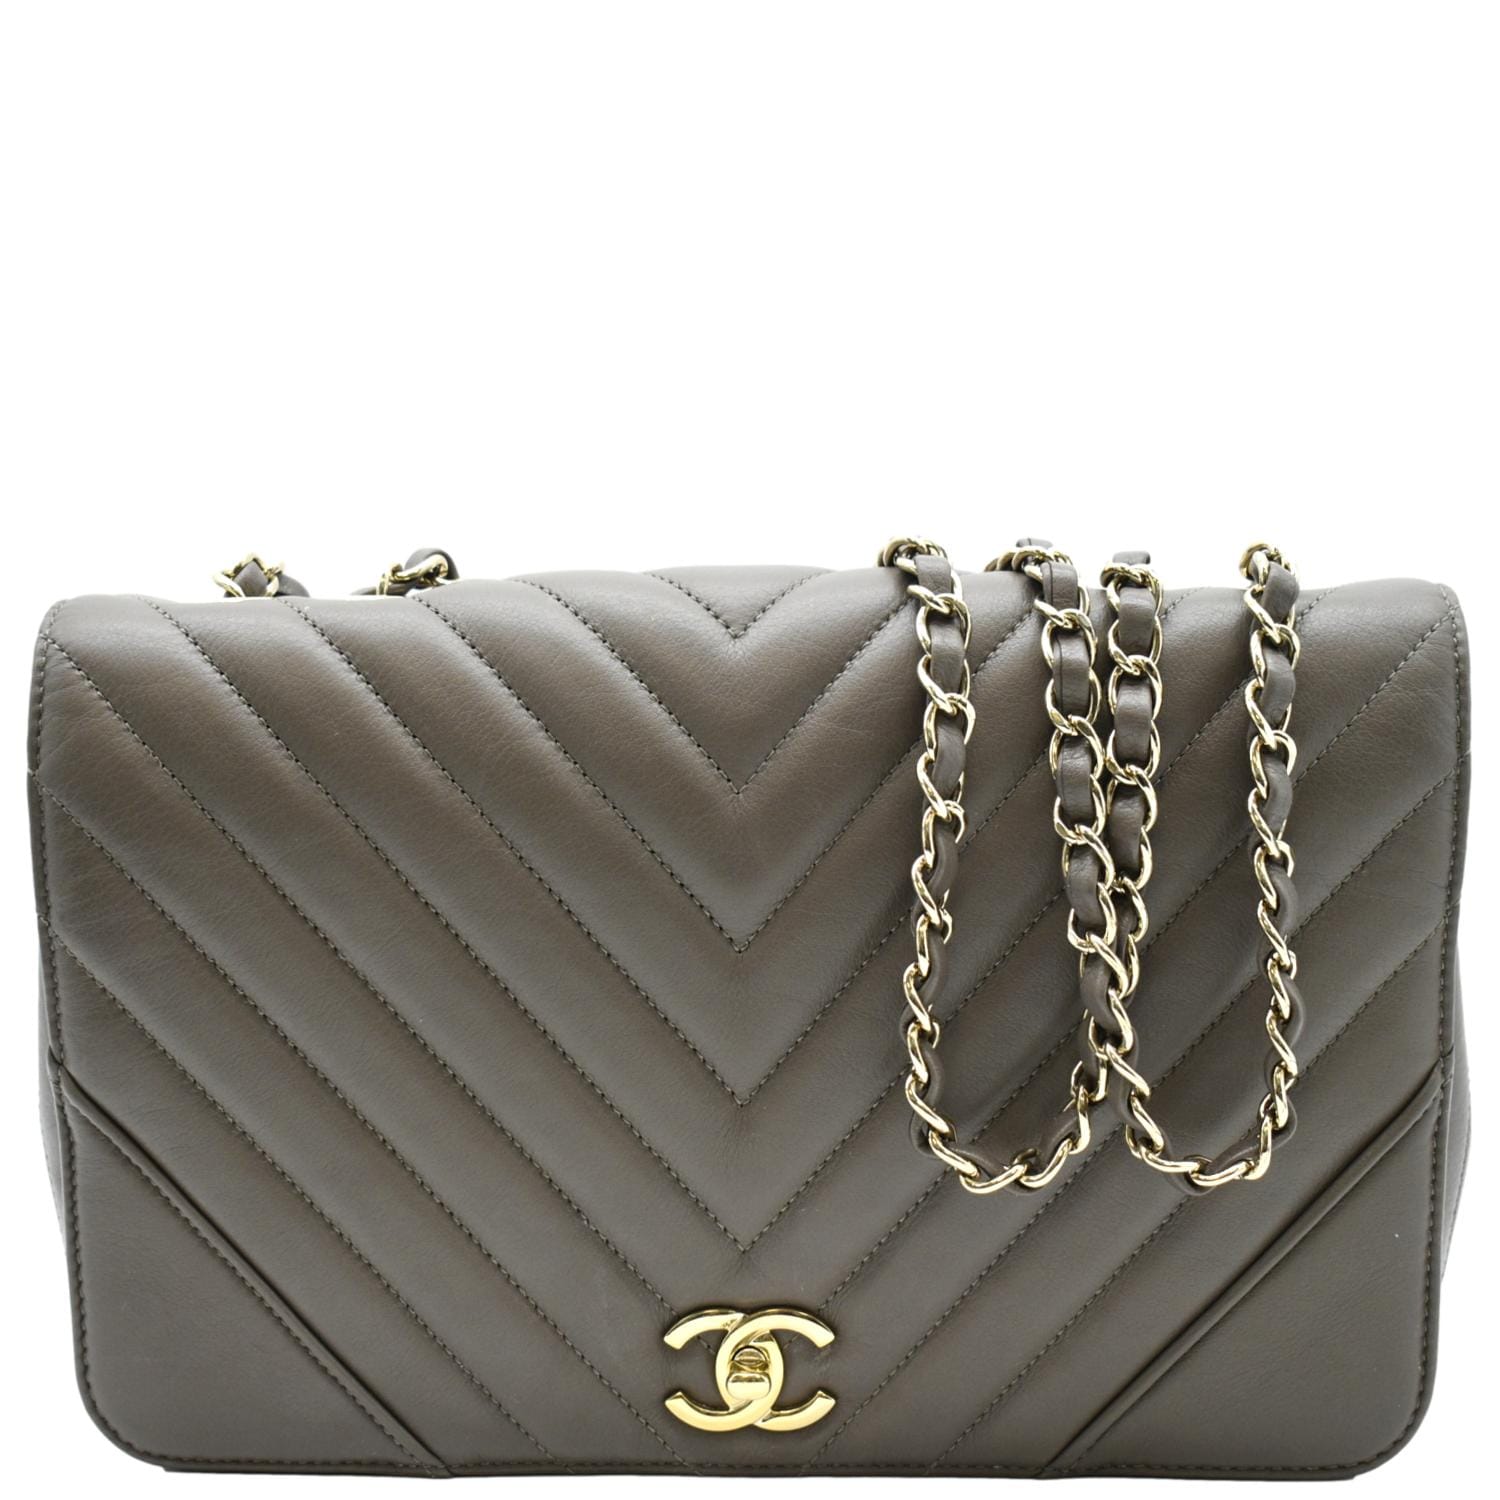 Shop CHANEL Street Style Vanity Bags Chain Plain Party Style by